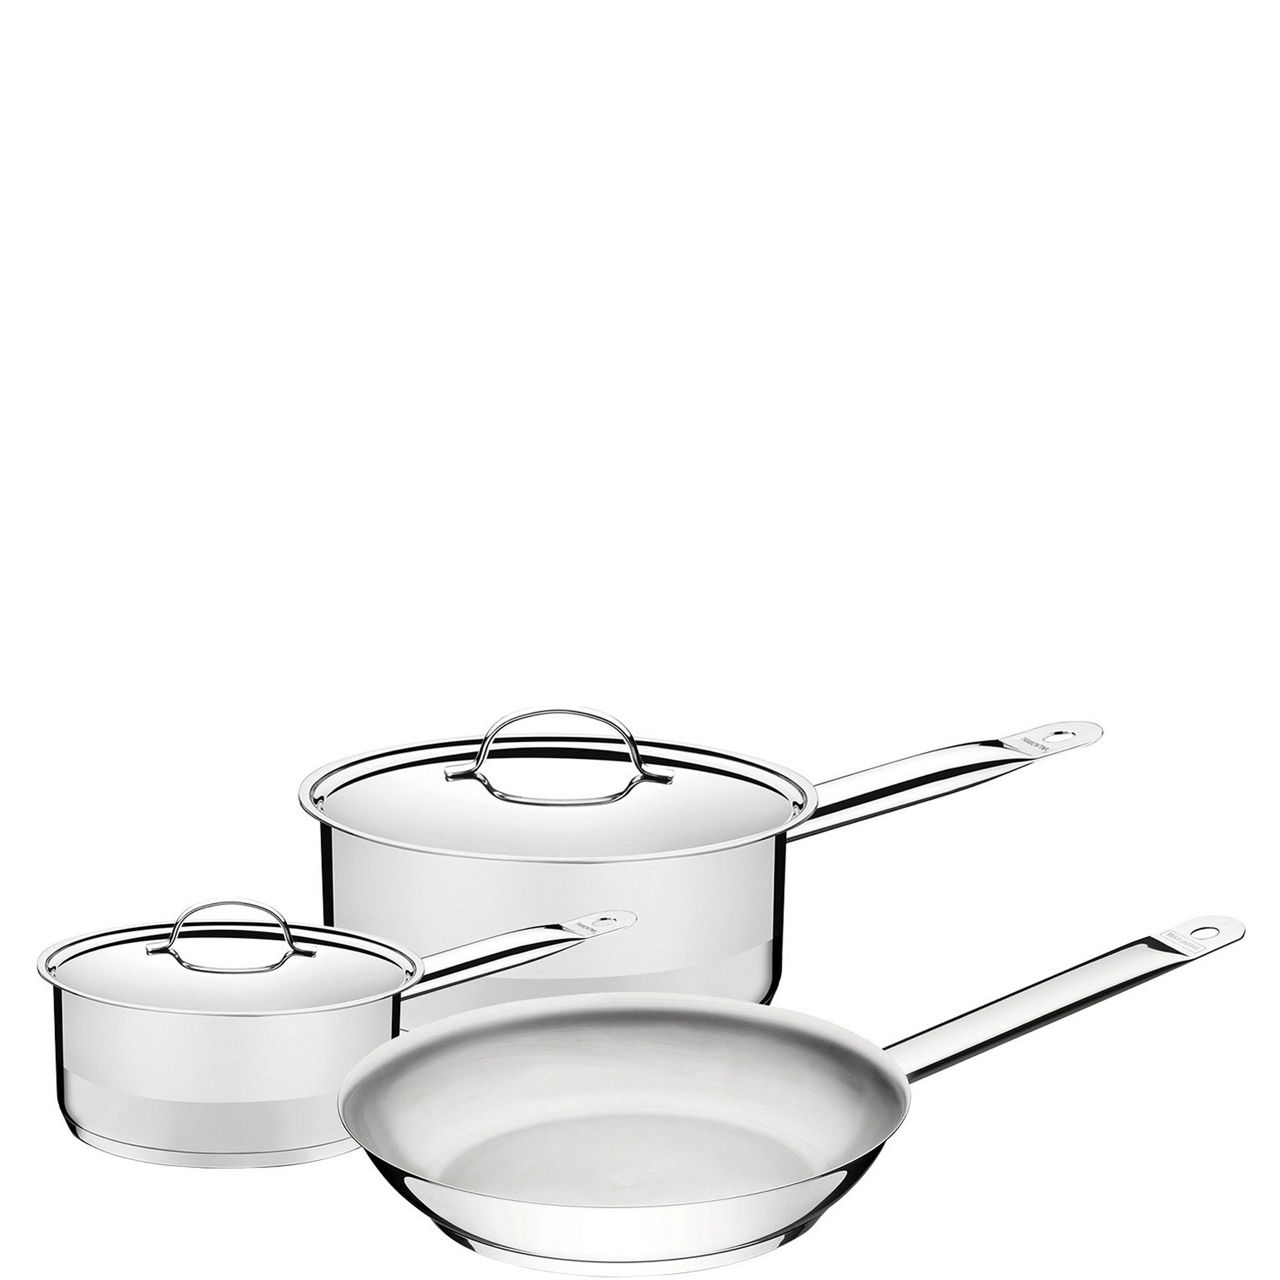 Tramontina Allegra Stainless Steel Cookware Set 4 Pieces Silver